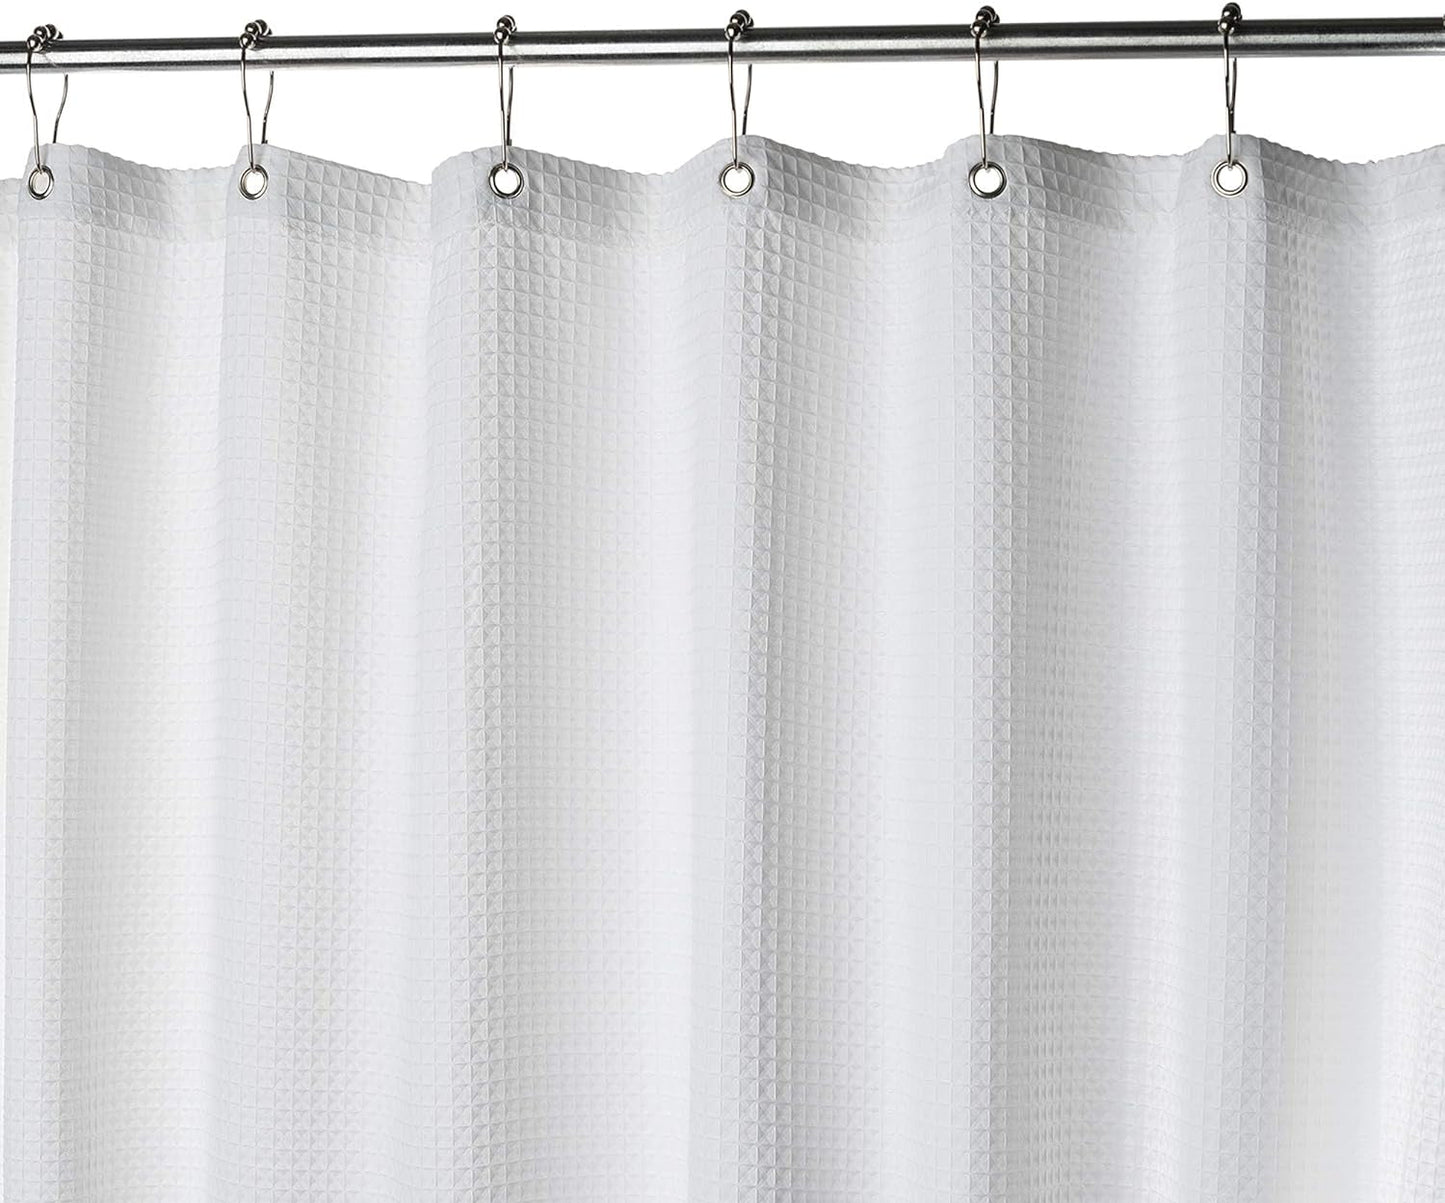 Creative Scents Fabric White Shower Curtain for Bathroom - Spa, Hotel Luxury Matt Waffle Weave Square Design, Water Repellent, 230 GSM Weighty Cloth, 72" X 72" for Decorative Bathroom Curtains